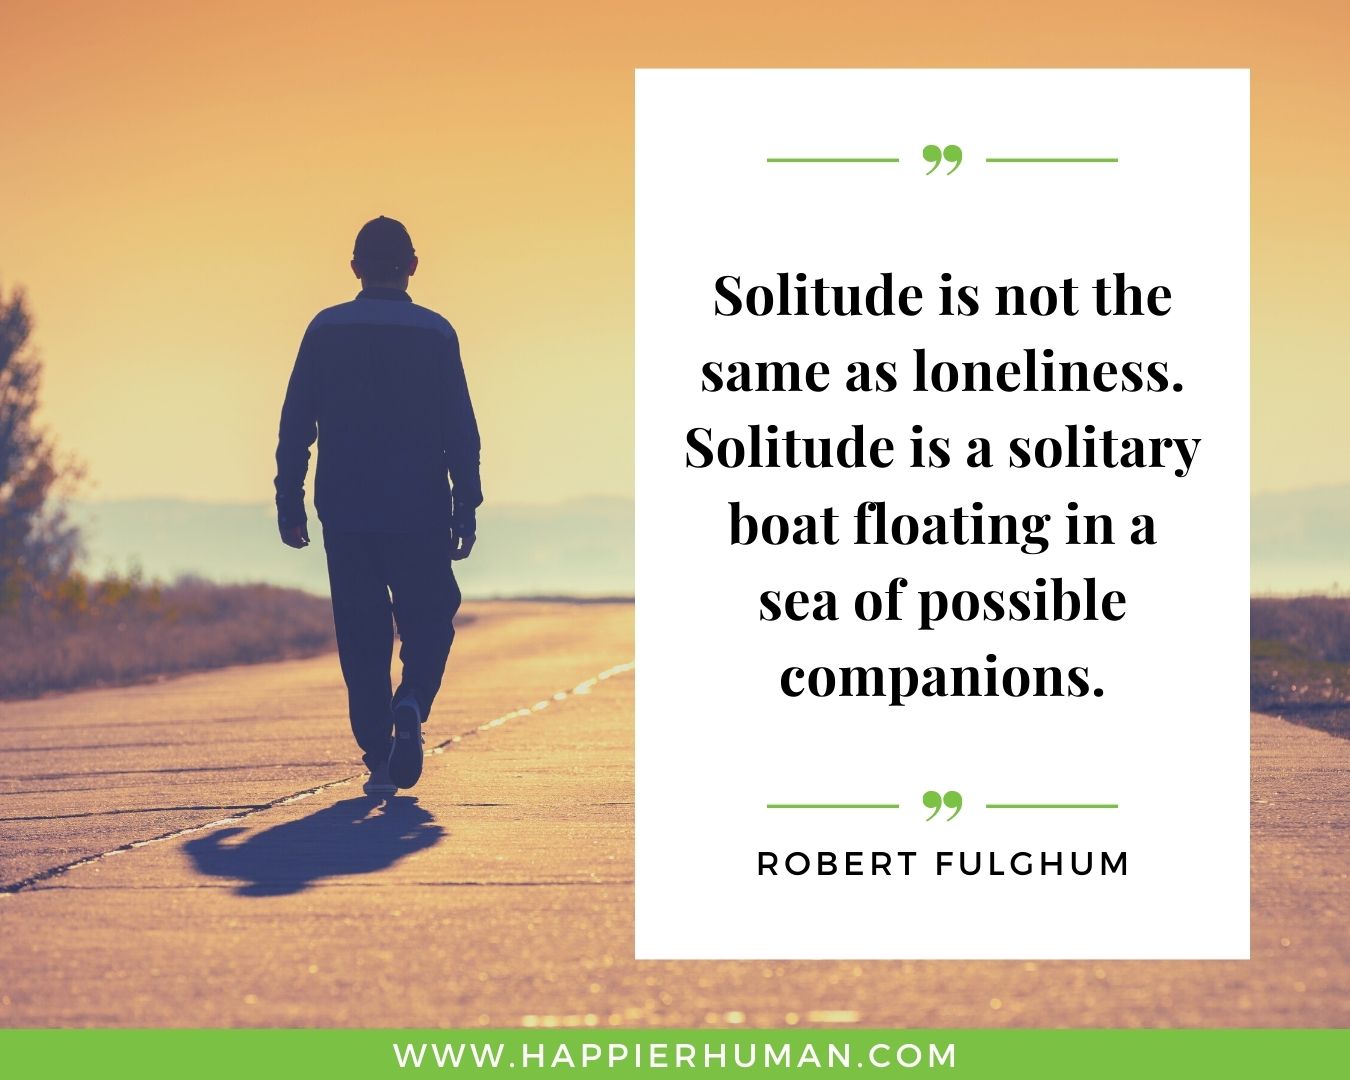 Loneliness Quotes - “Solitude is not the same as loneliness. Solitude is a solitary boat floating in a sea of possible companions.”– Robert Fulghum